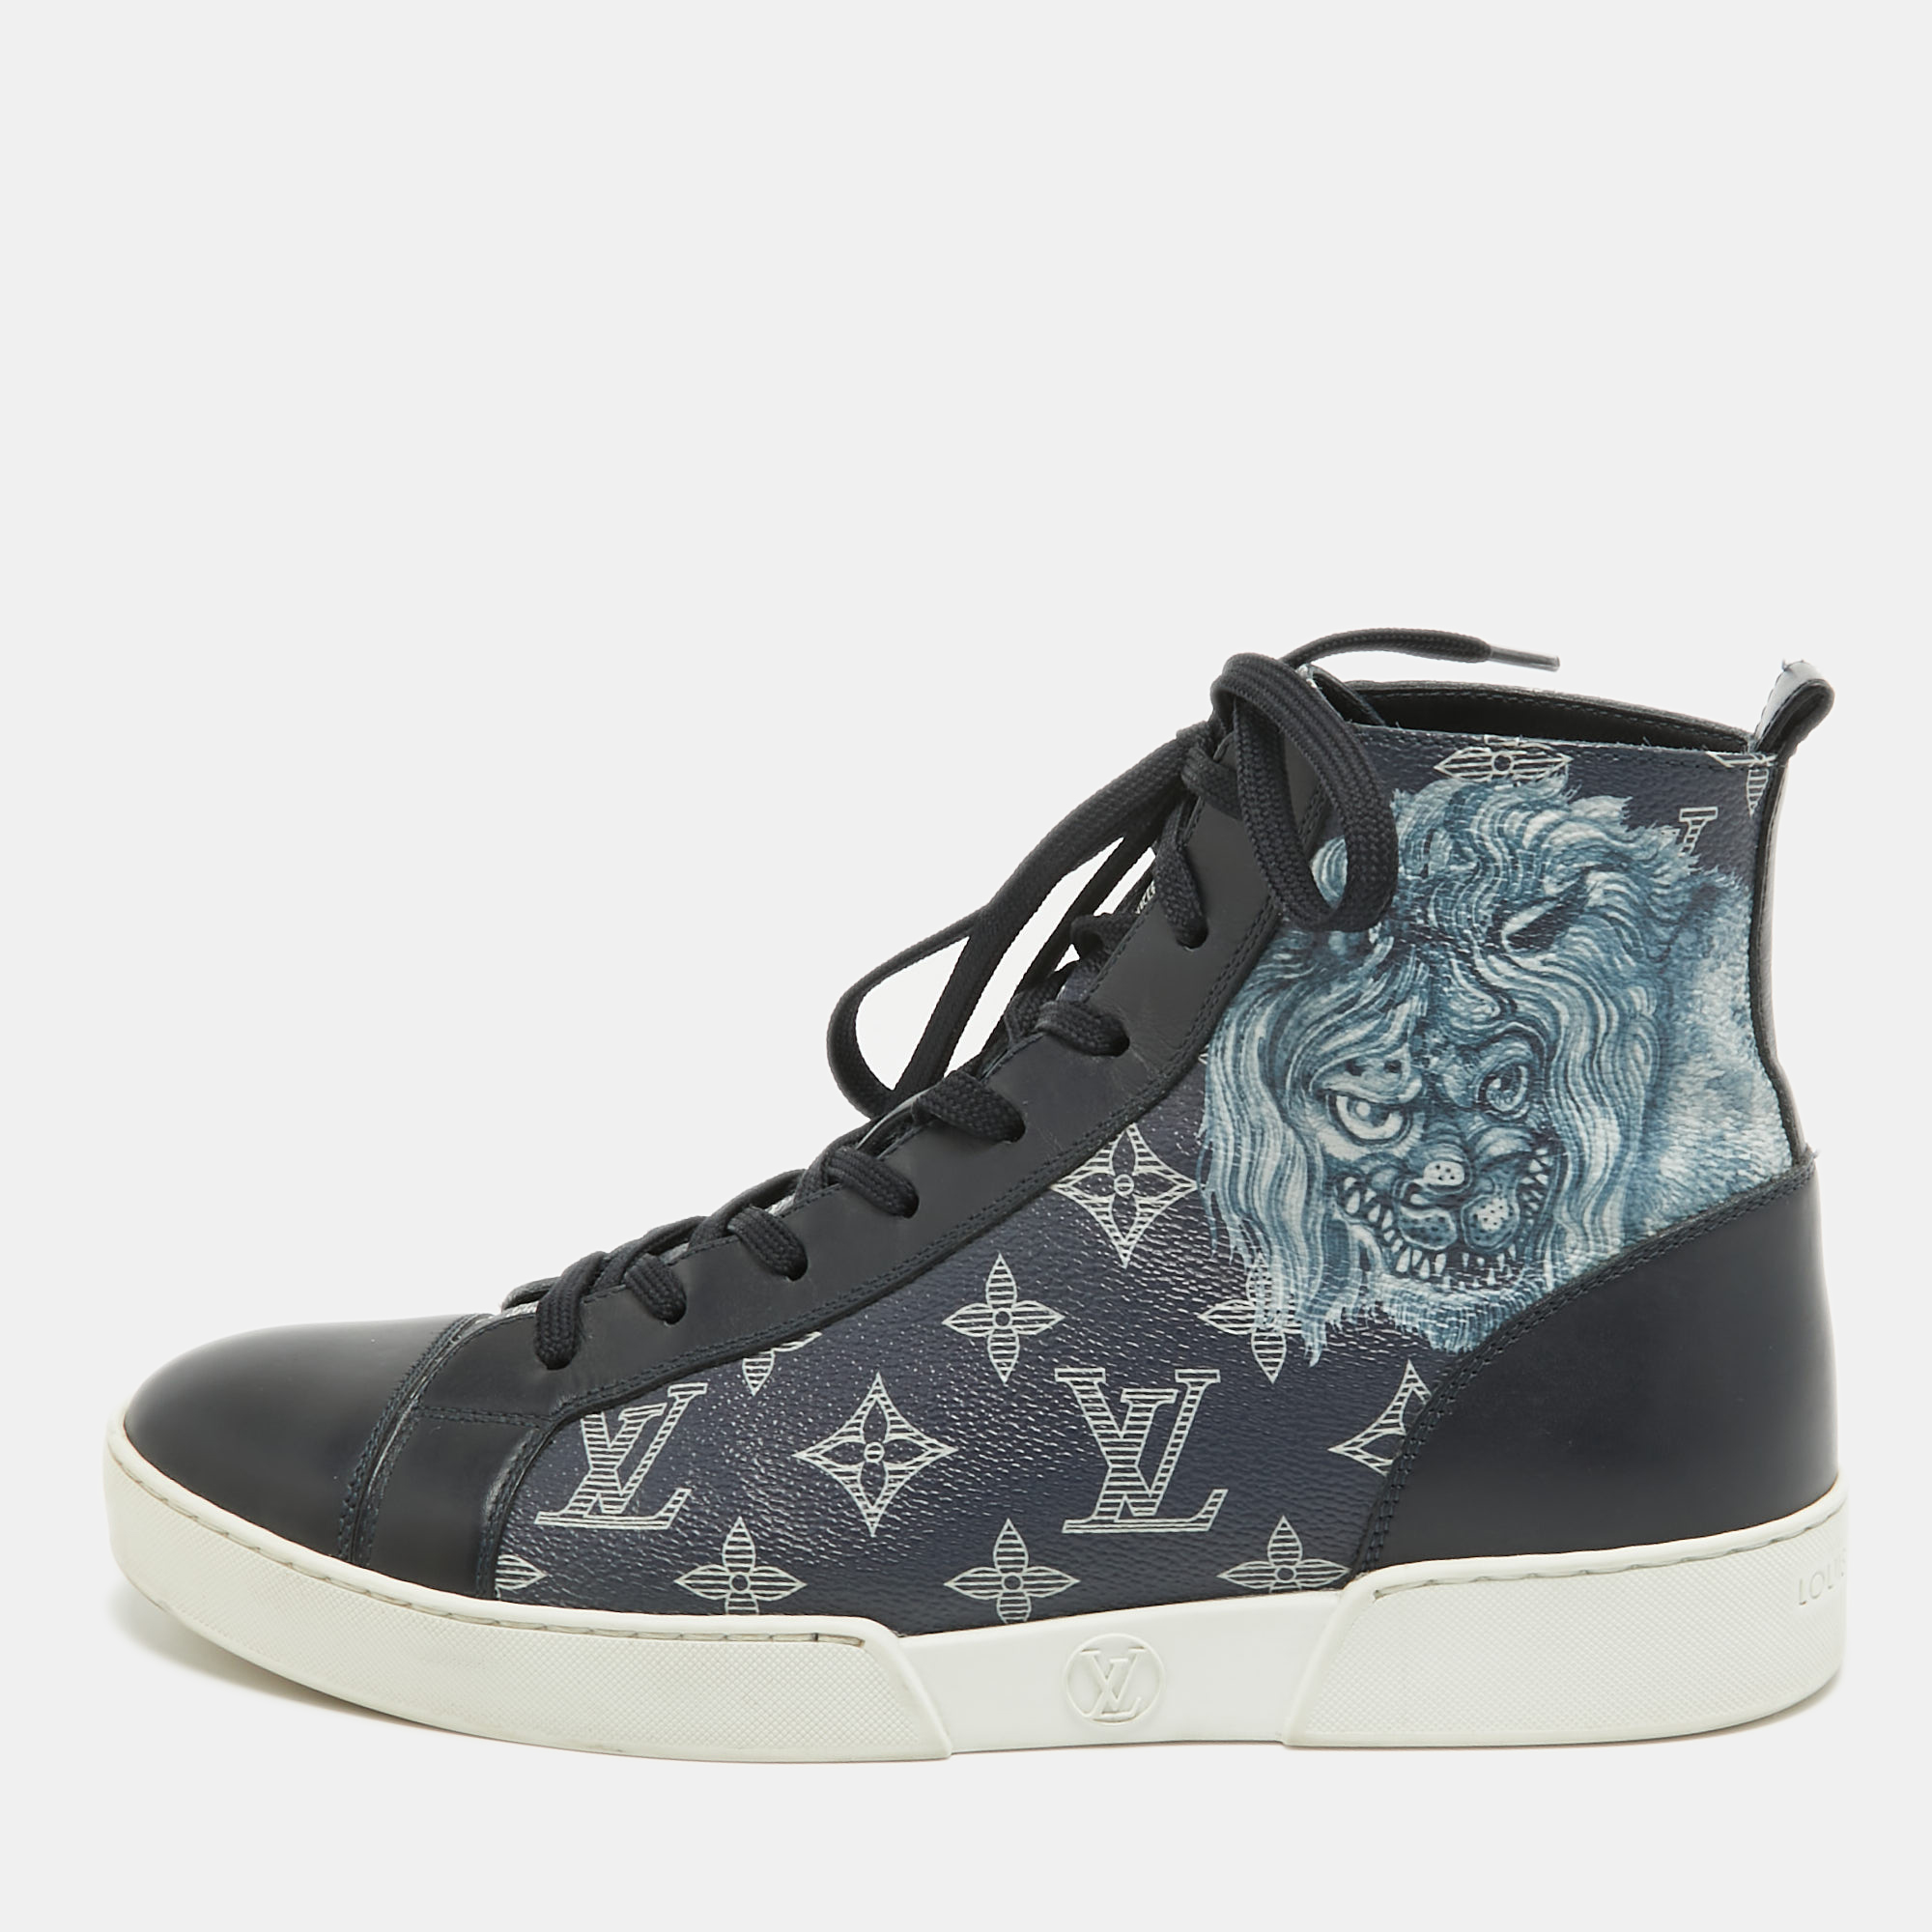 Pre-owned Louis Vuitton Louise Vuitton Navy Blue Canvas And Leather Match Up Cloth Trainer High Top Trainers Size 40